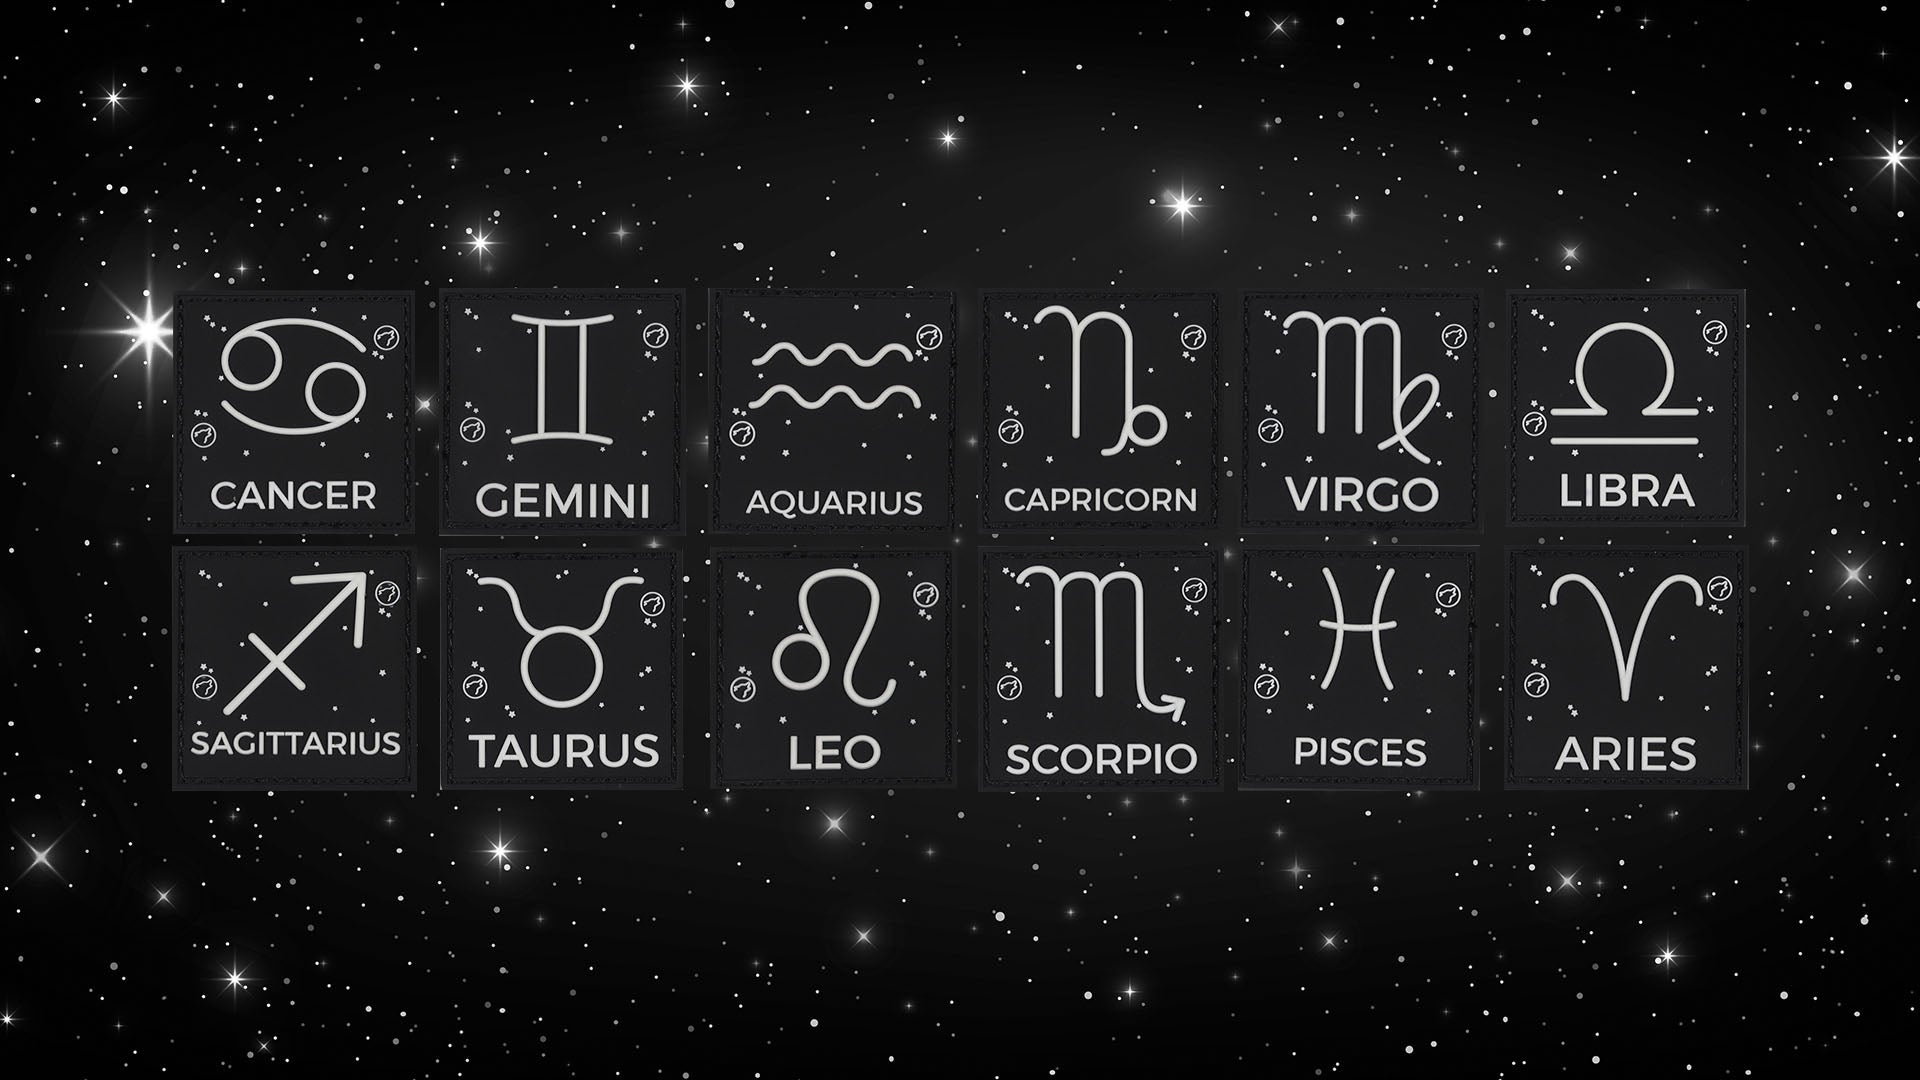 Is Astrology Real?